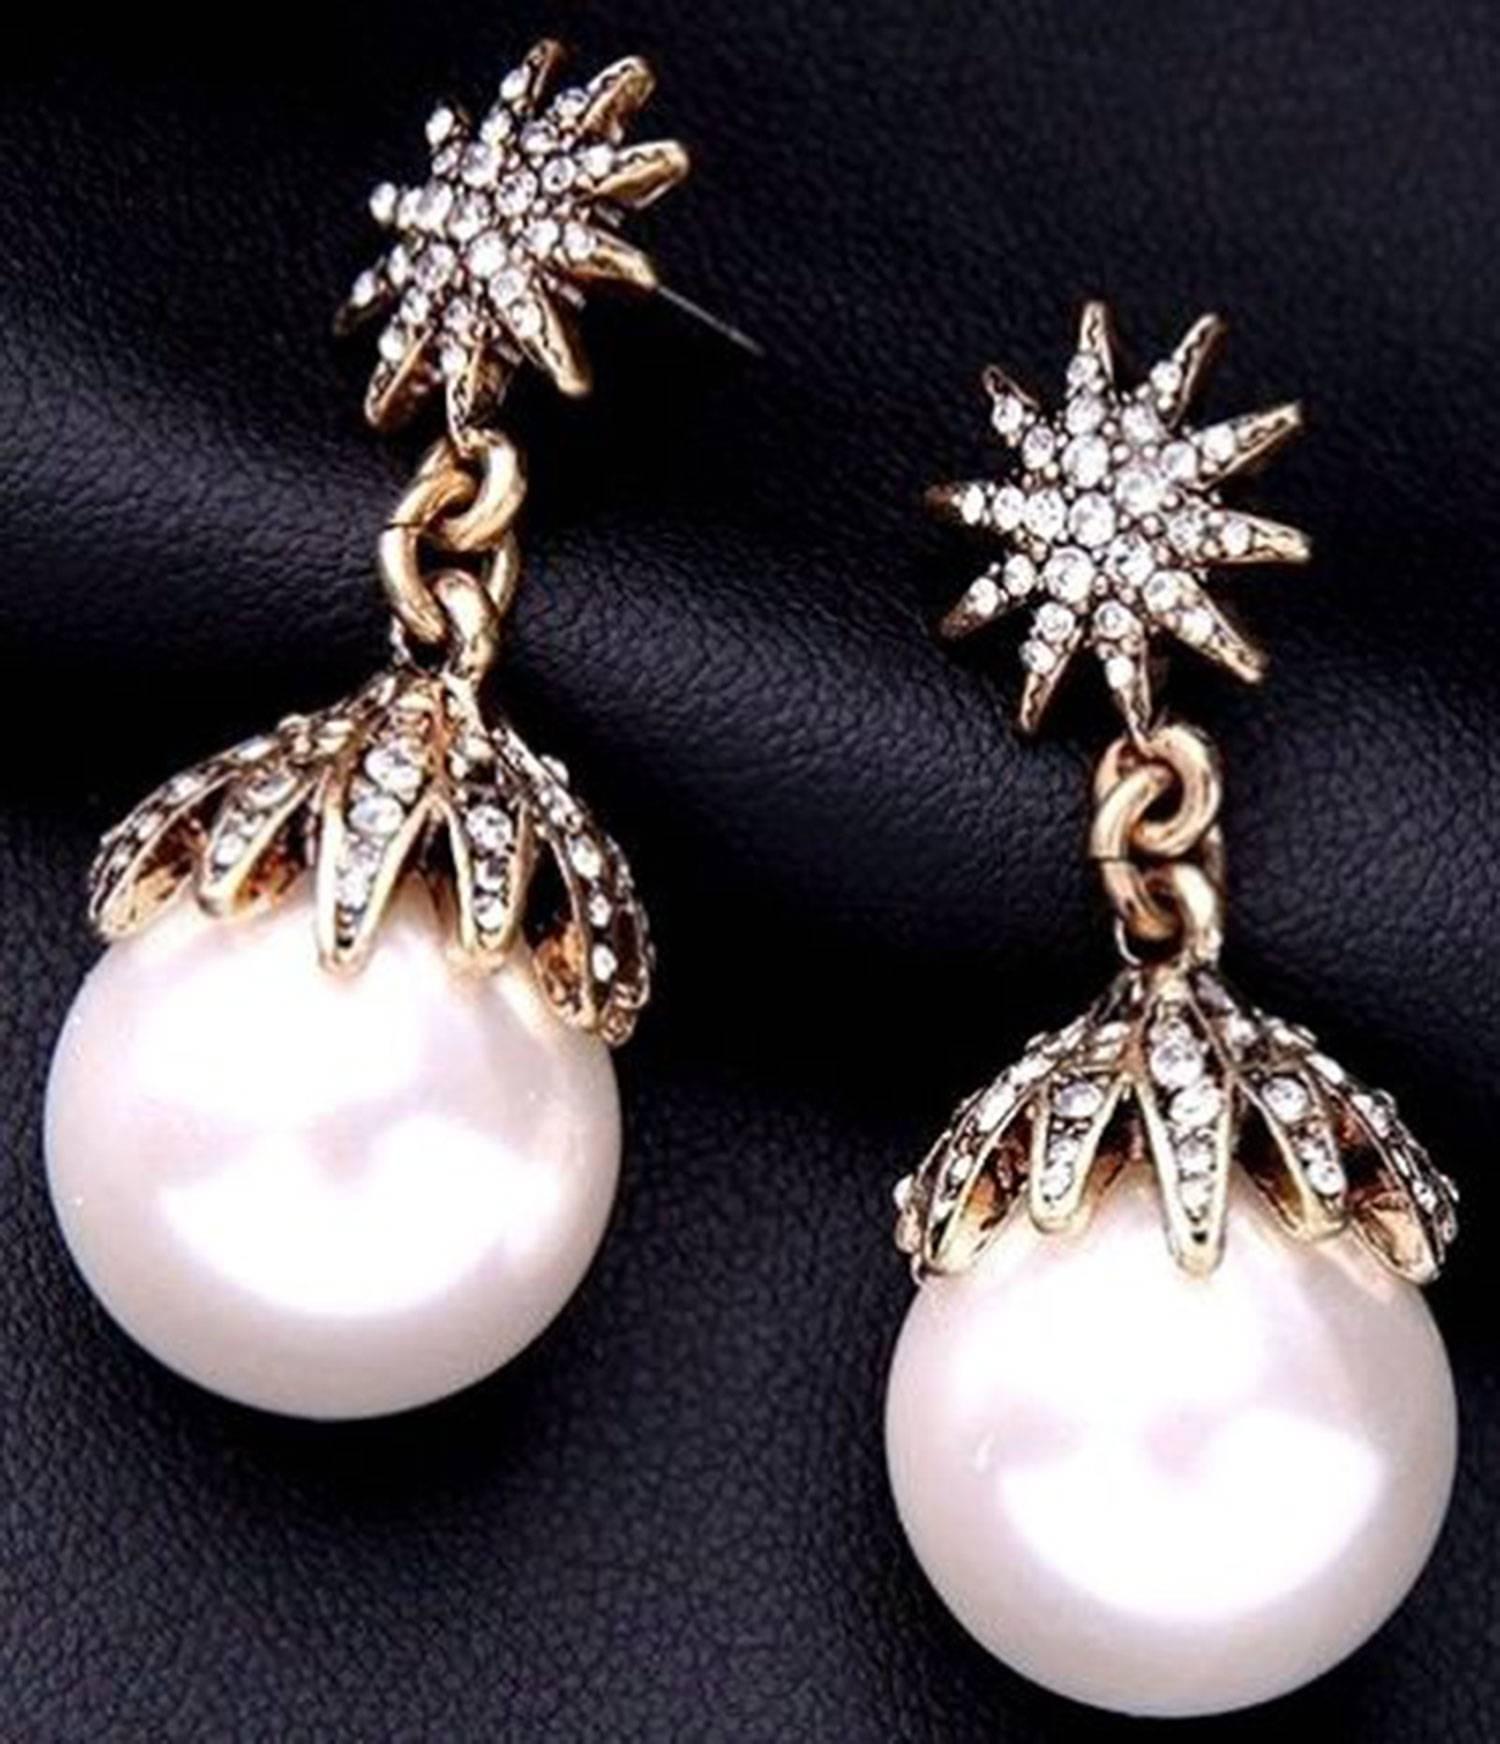 Beautiful Oscar De La Renta Runway Earrings, comprising Faux Pearl Crown capped Sparkling Crystals. Post system. Add your own Chic Style and Pizzazz to any outfit! 
